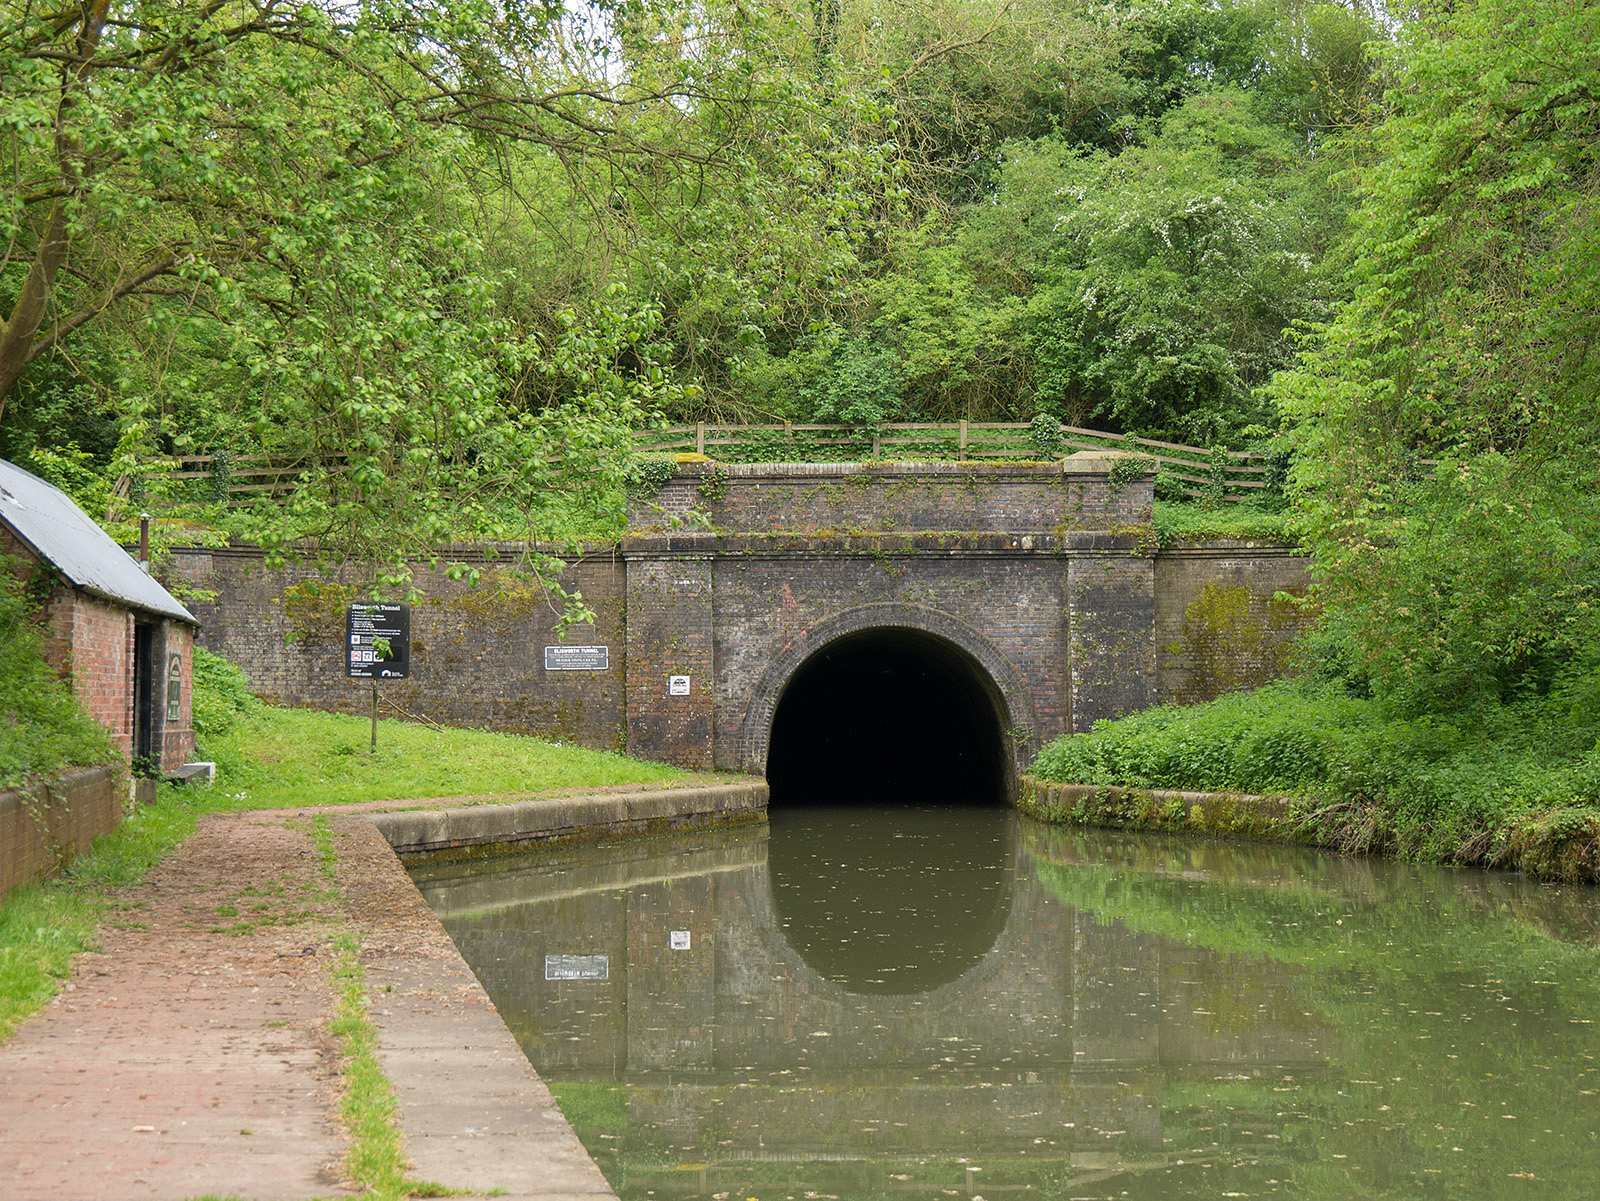 Looking back to the northern entrance to Blissworth tunnel